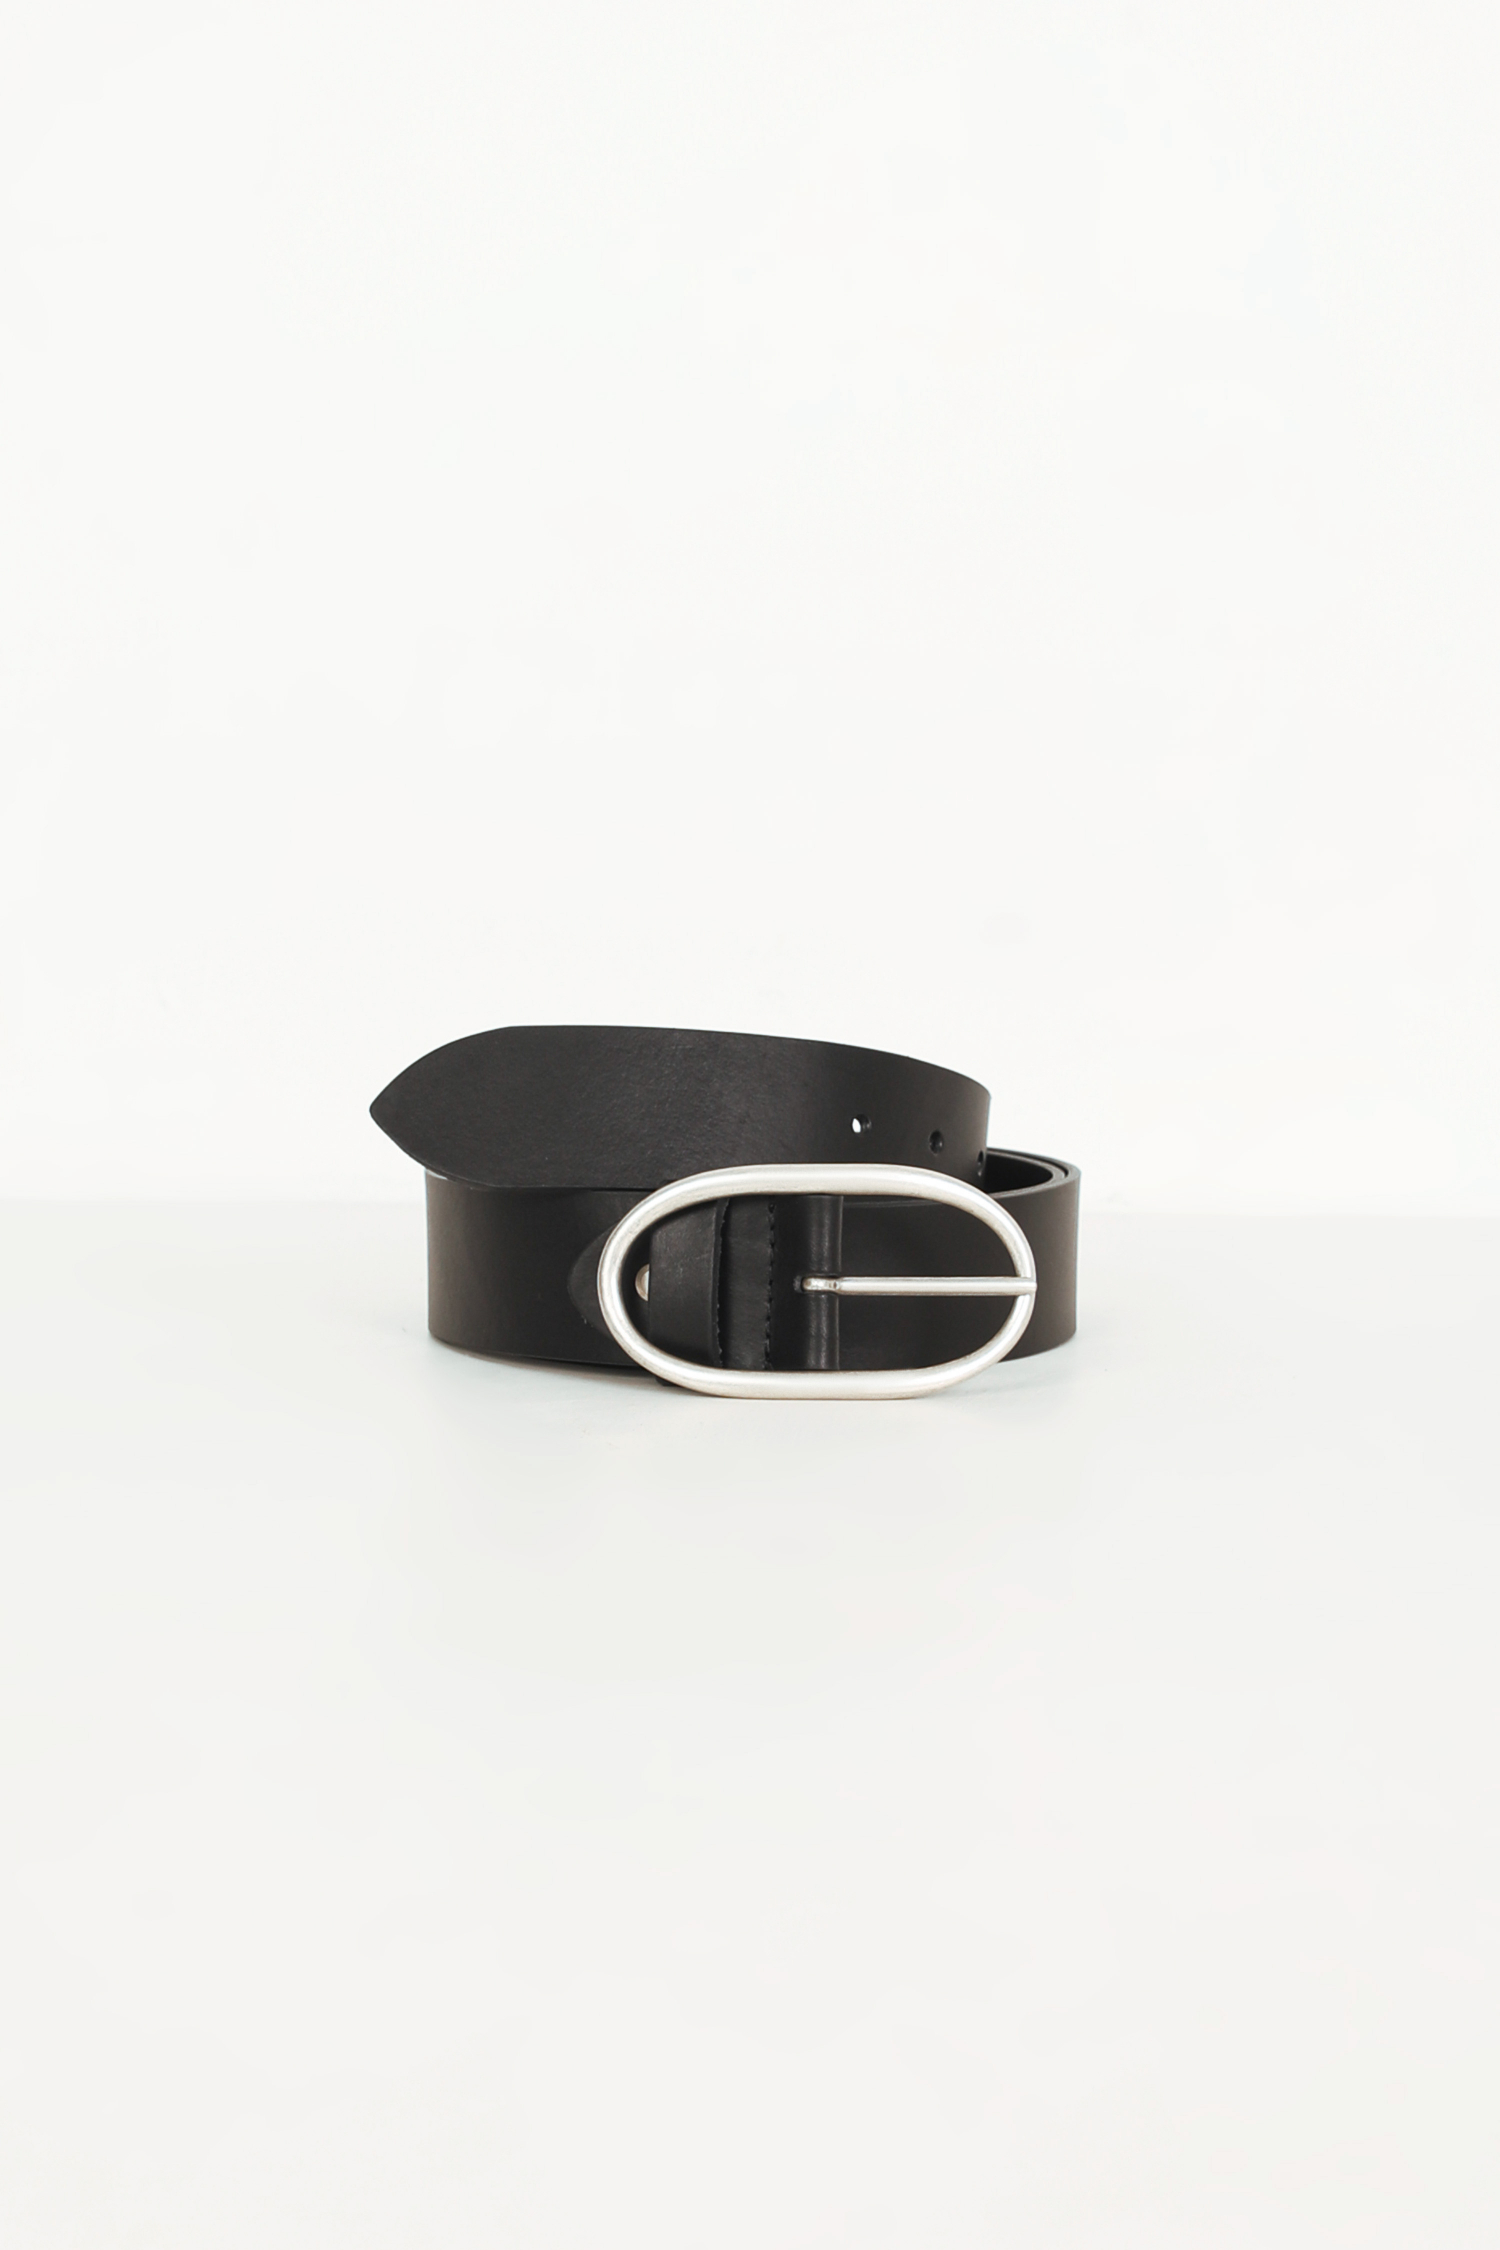 black leather belt with silver buckle (shipping May 5/10)